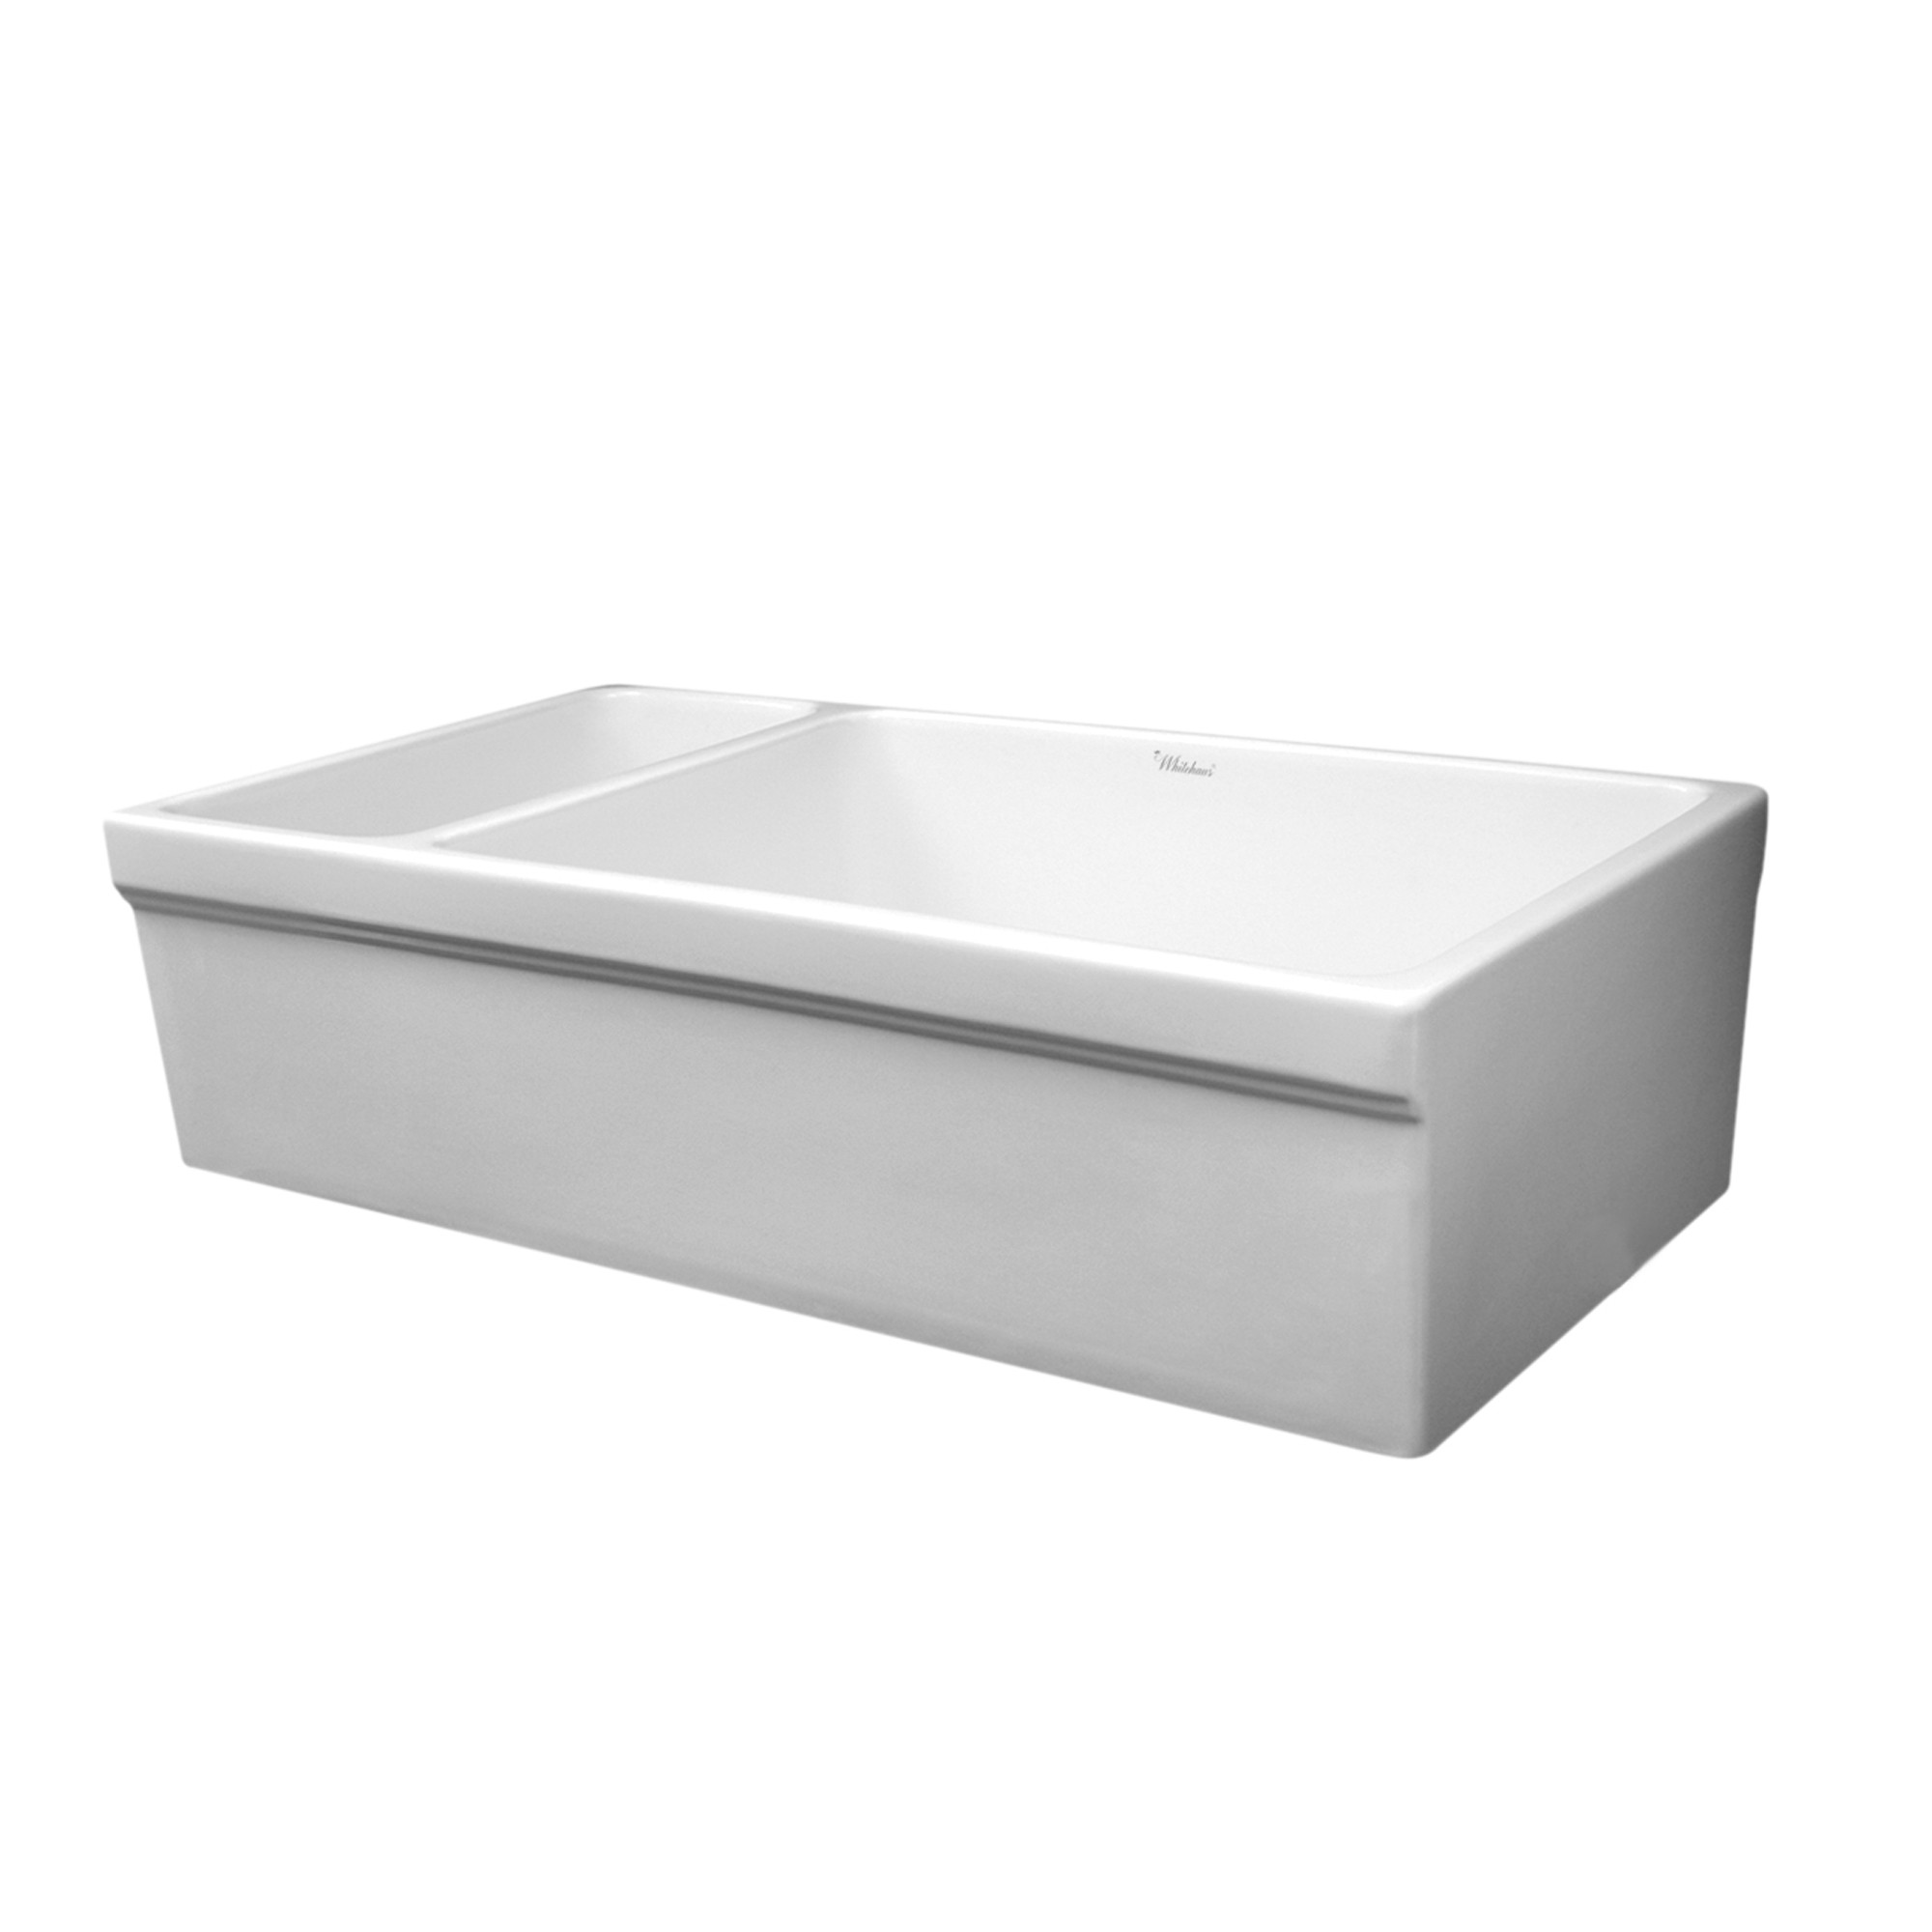 Farmhaus Fireclay Quatro Alcove Large Reversible Sink and Small Bowl with Decorative 2 +" Lip on Both Sides